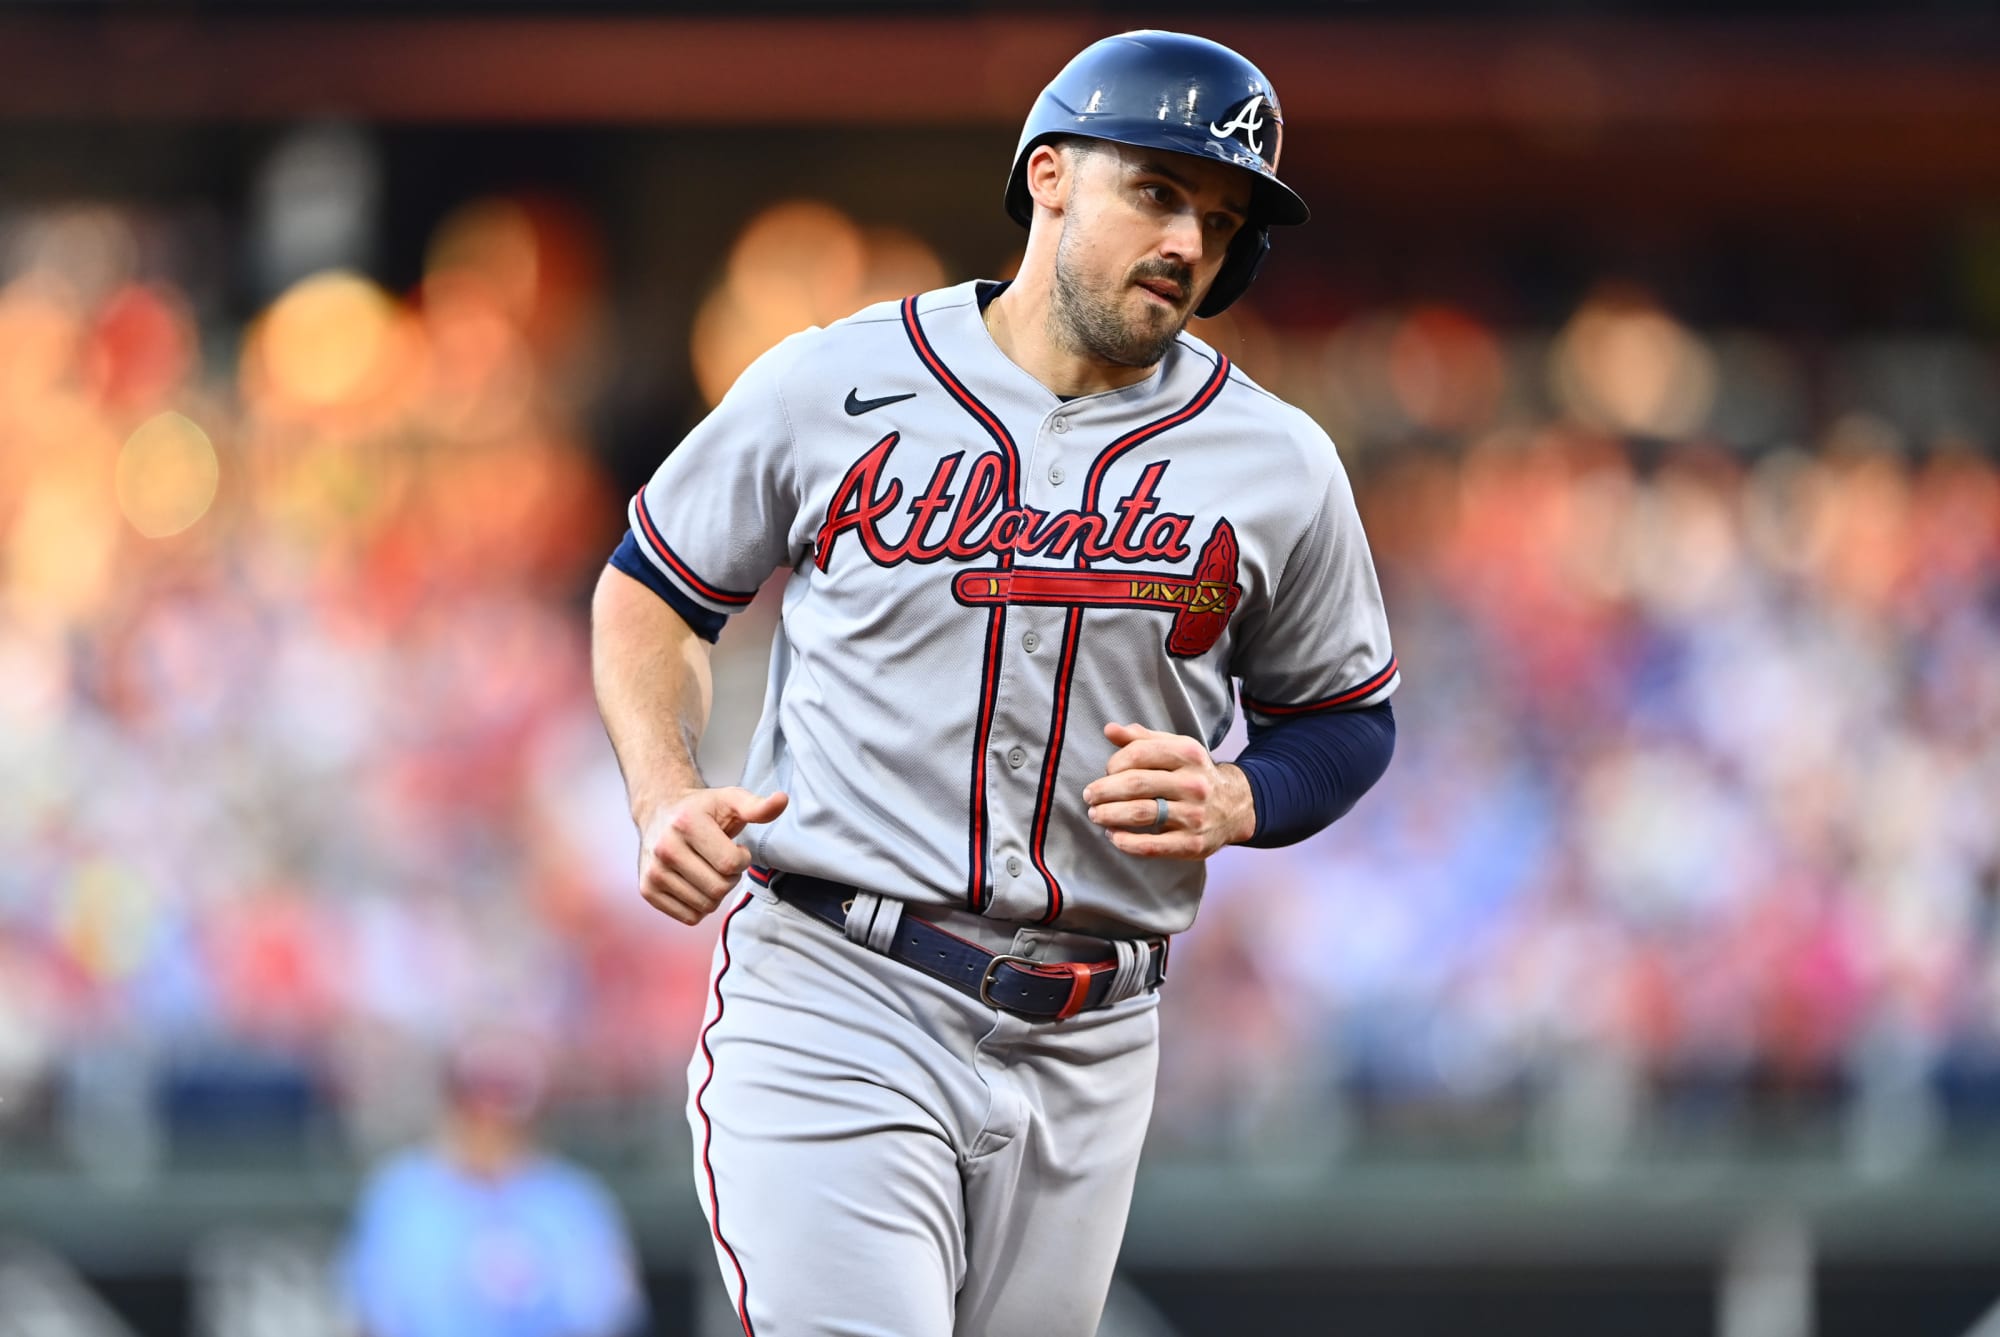 Inside the Clubhouse: Why Adam Duvall makes sense for the Yankees